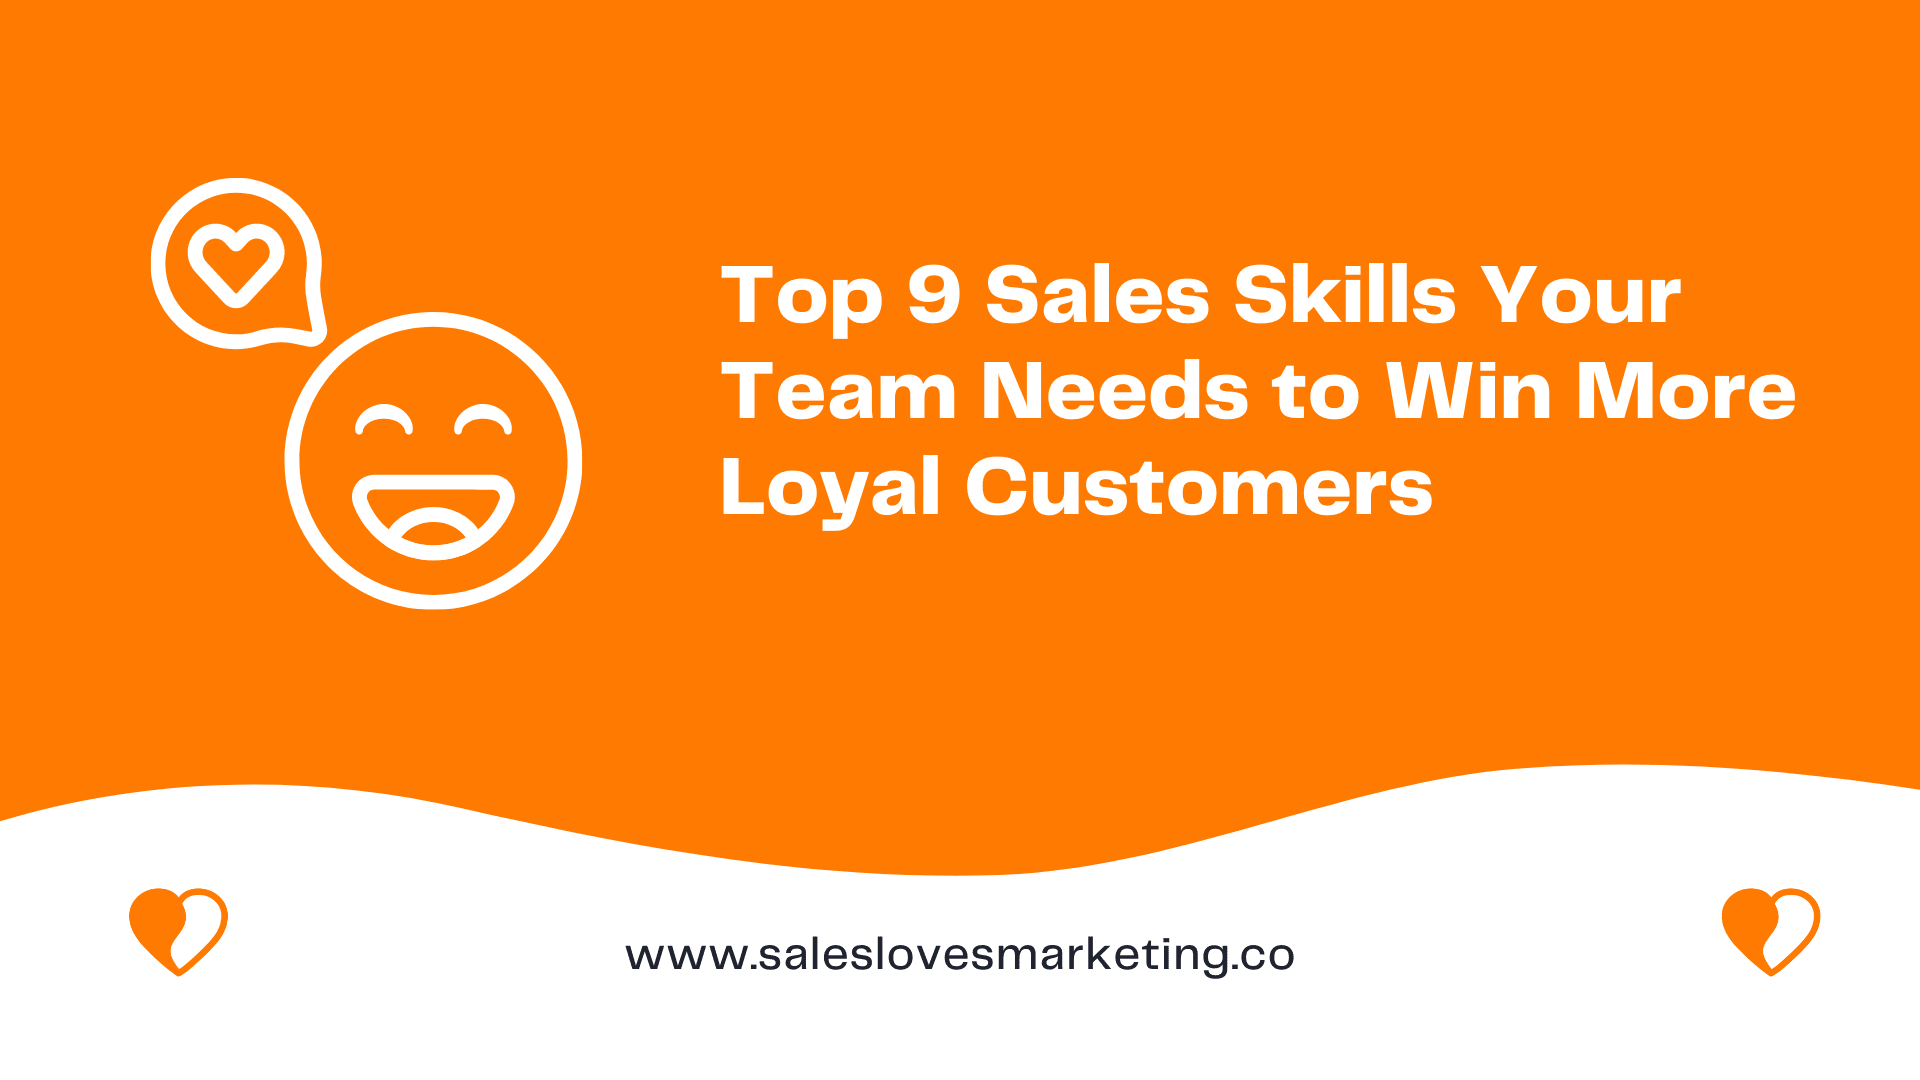 Top 9 Sales Skills Your Team Needs to Win More Loyal Customers